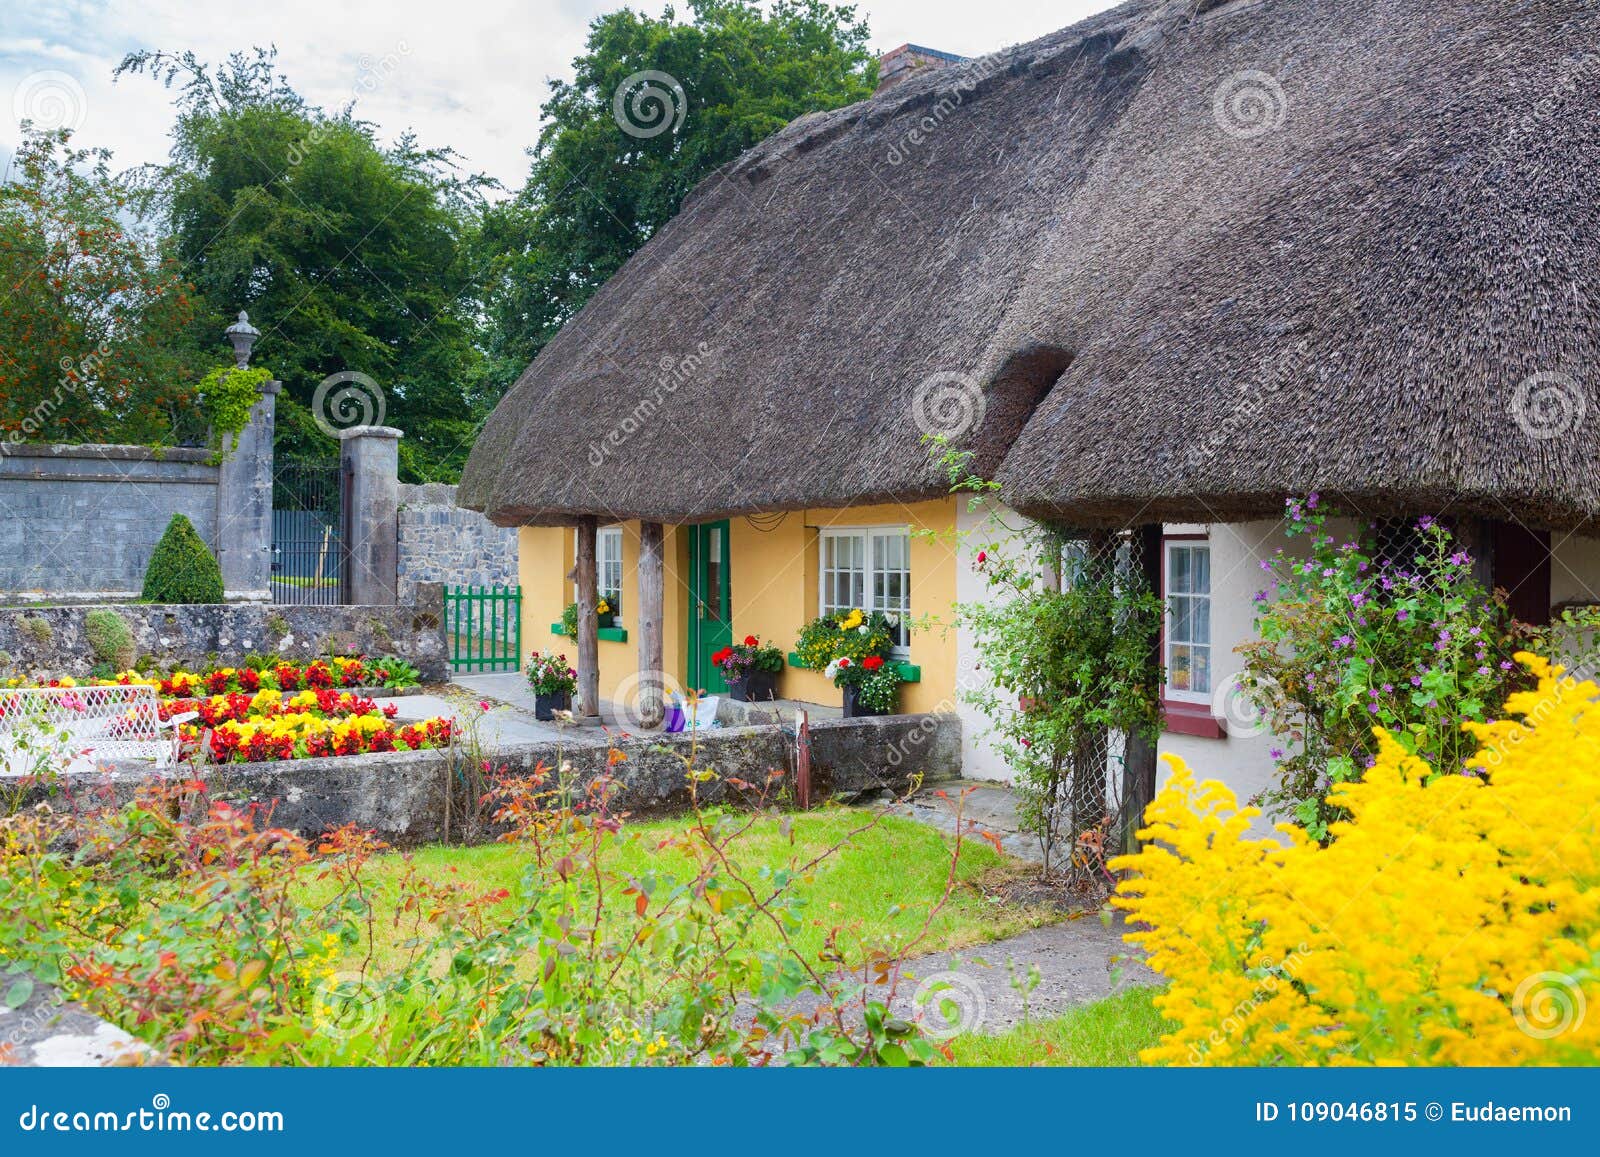 thatched cottage in adare, ireland